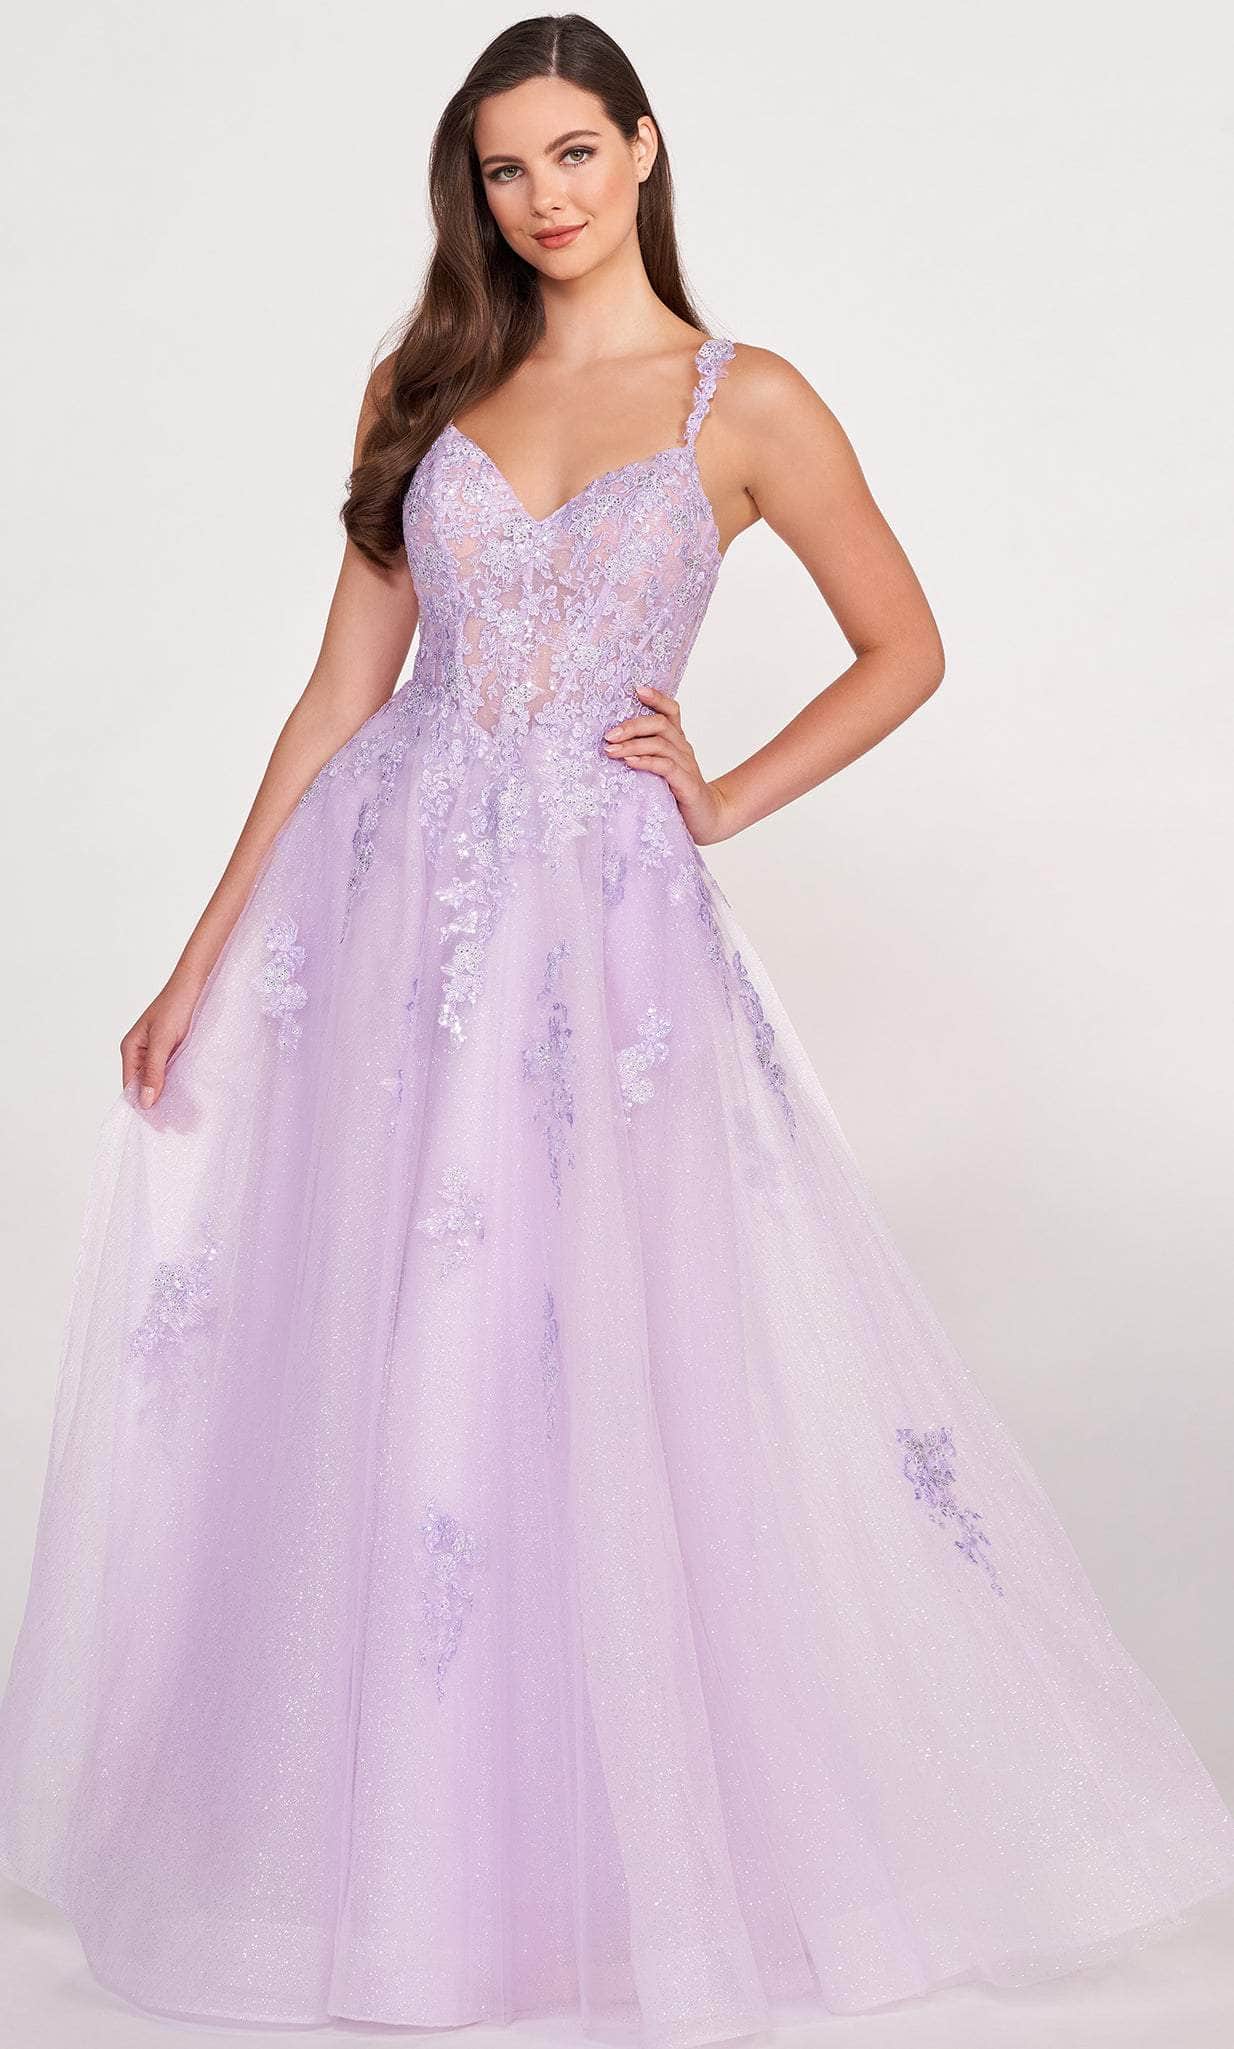 Ellie Wilde EW34098 - Sweetheart Floral Lace Ballgown Ball Gowns